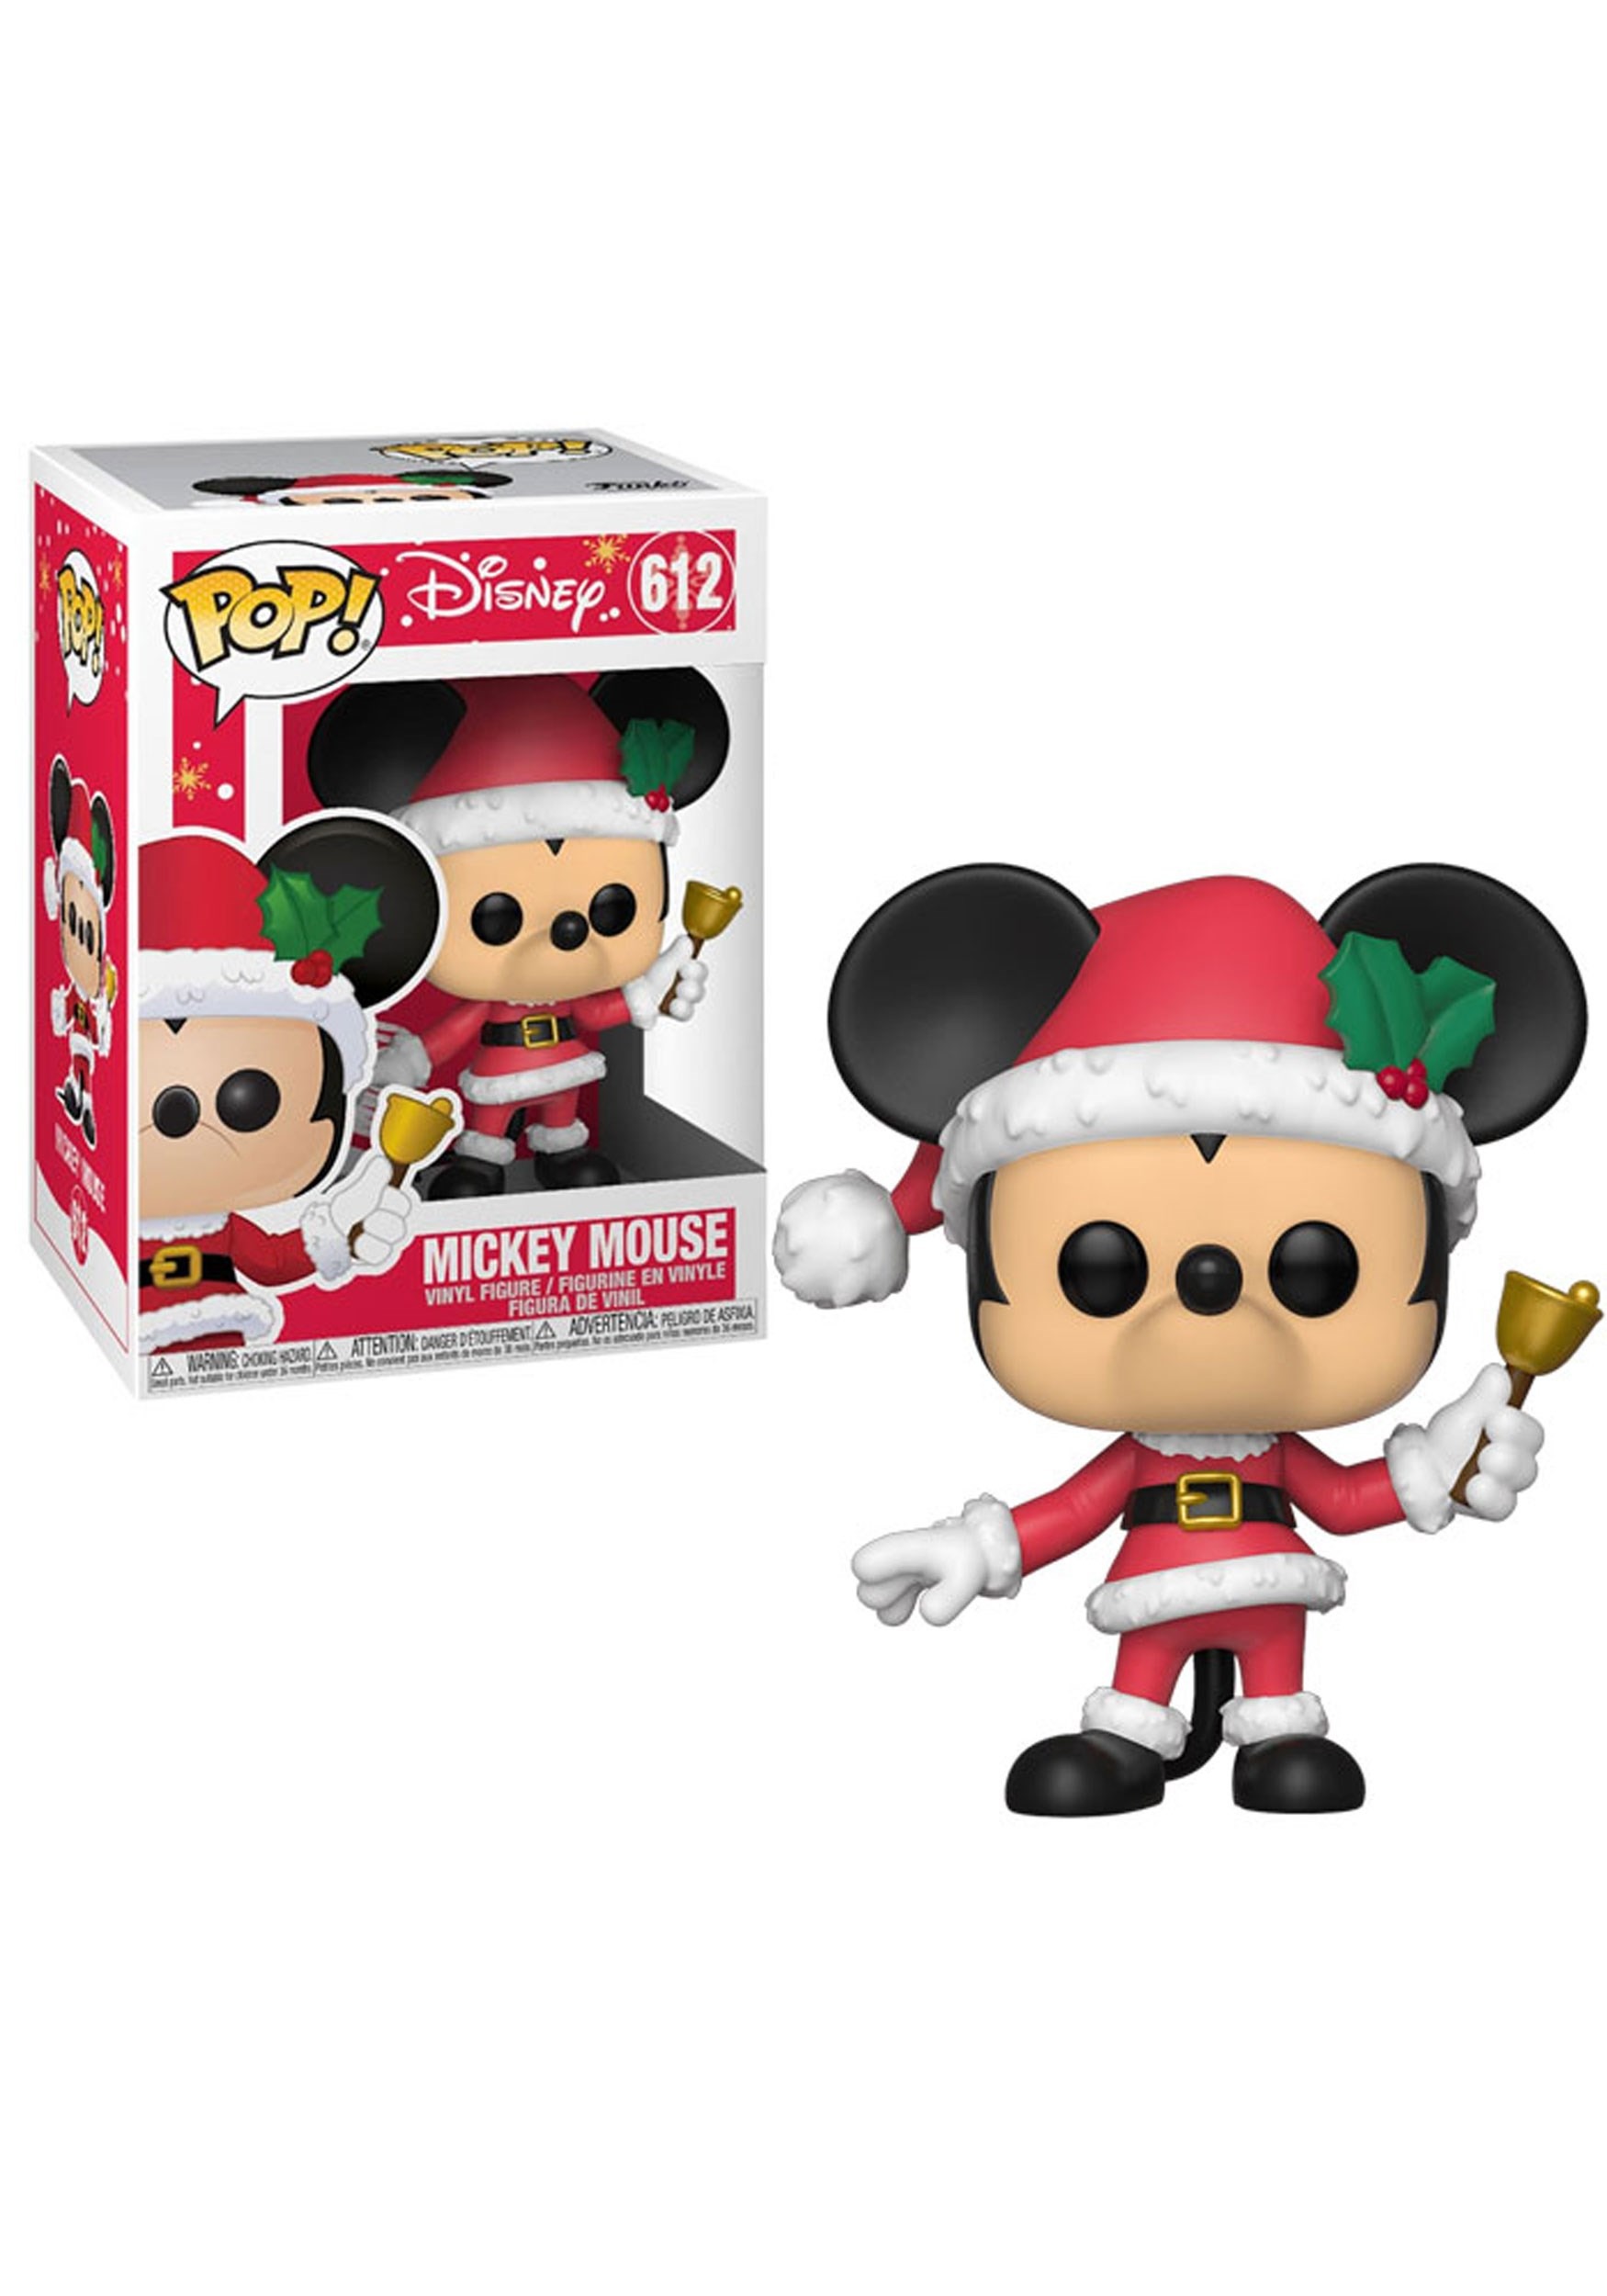 Pop! Disney: Holiday Mickey Mouse Figure